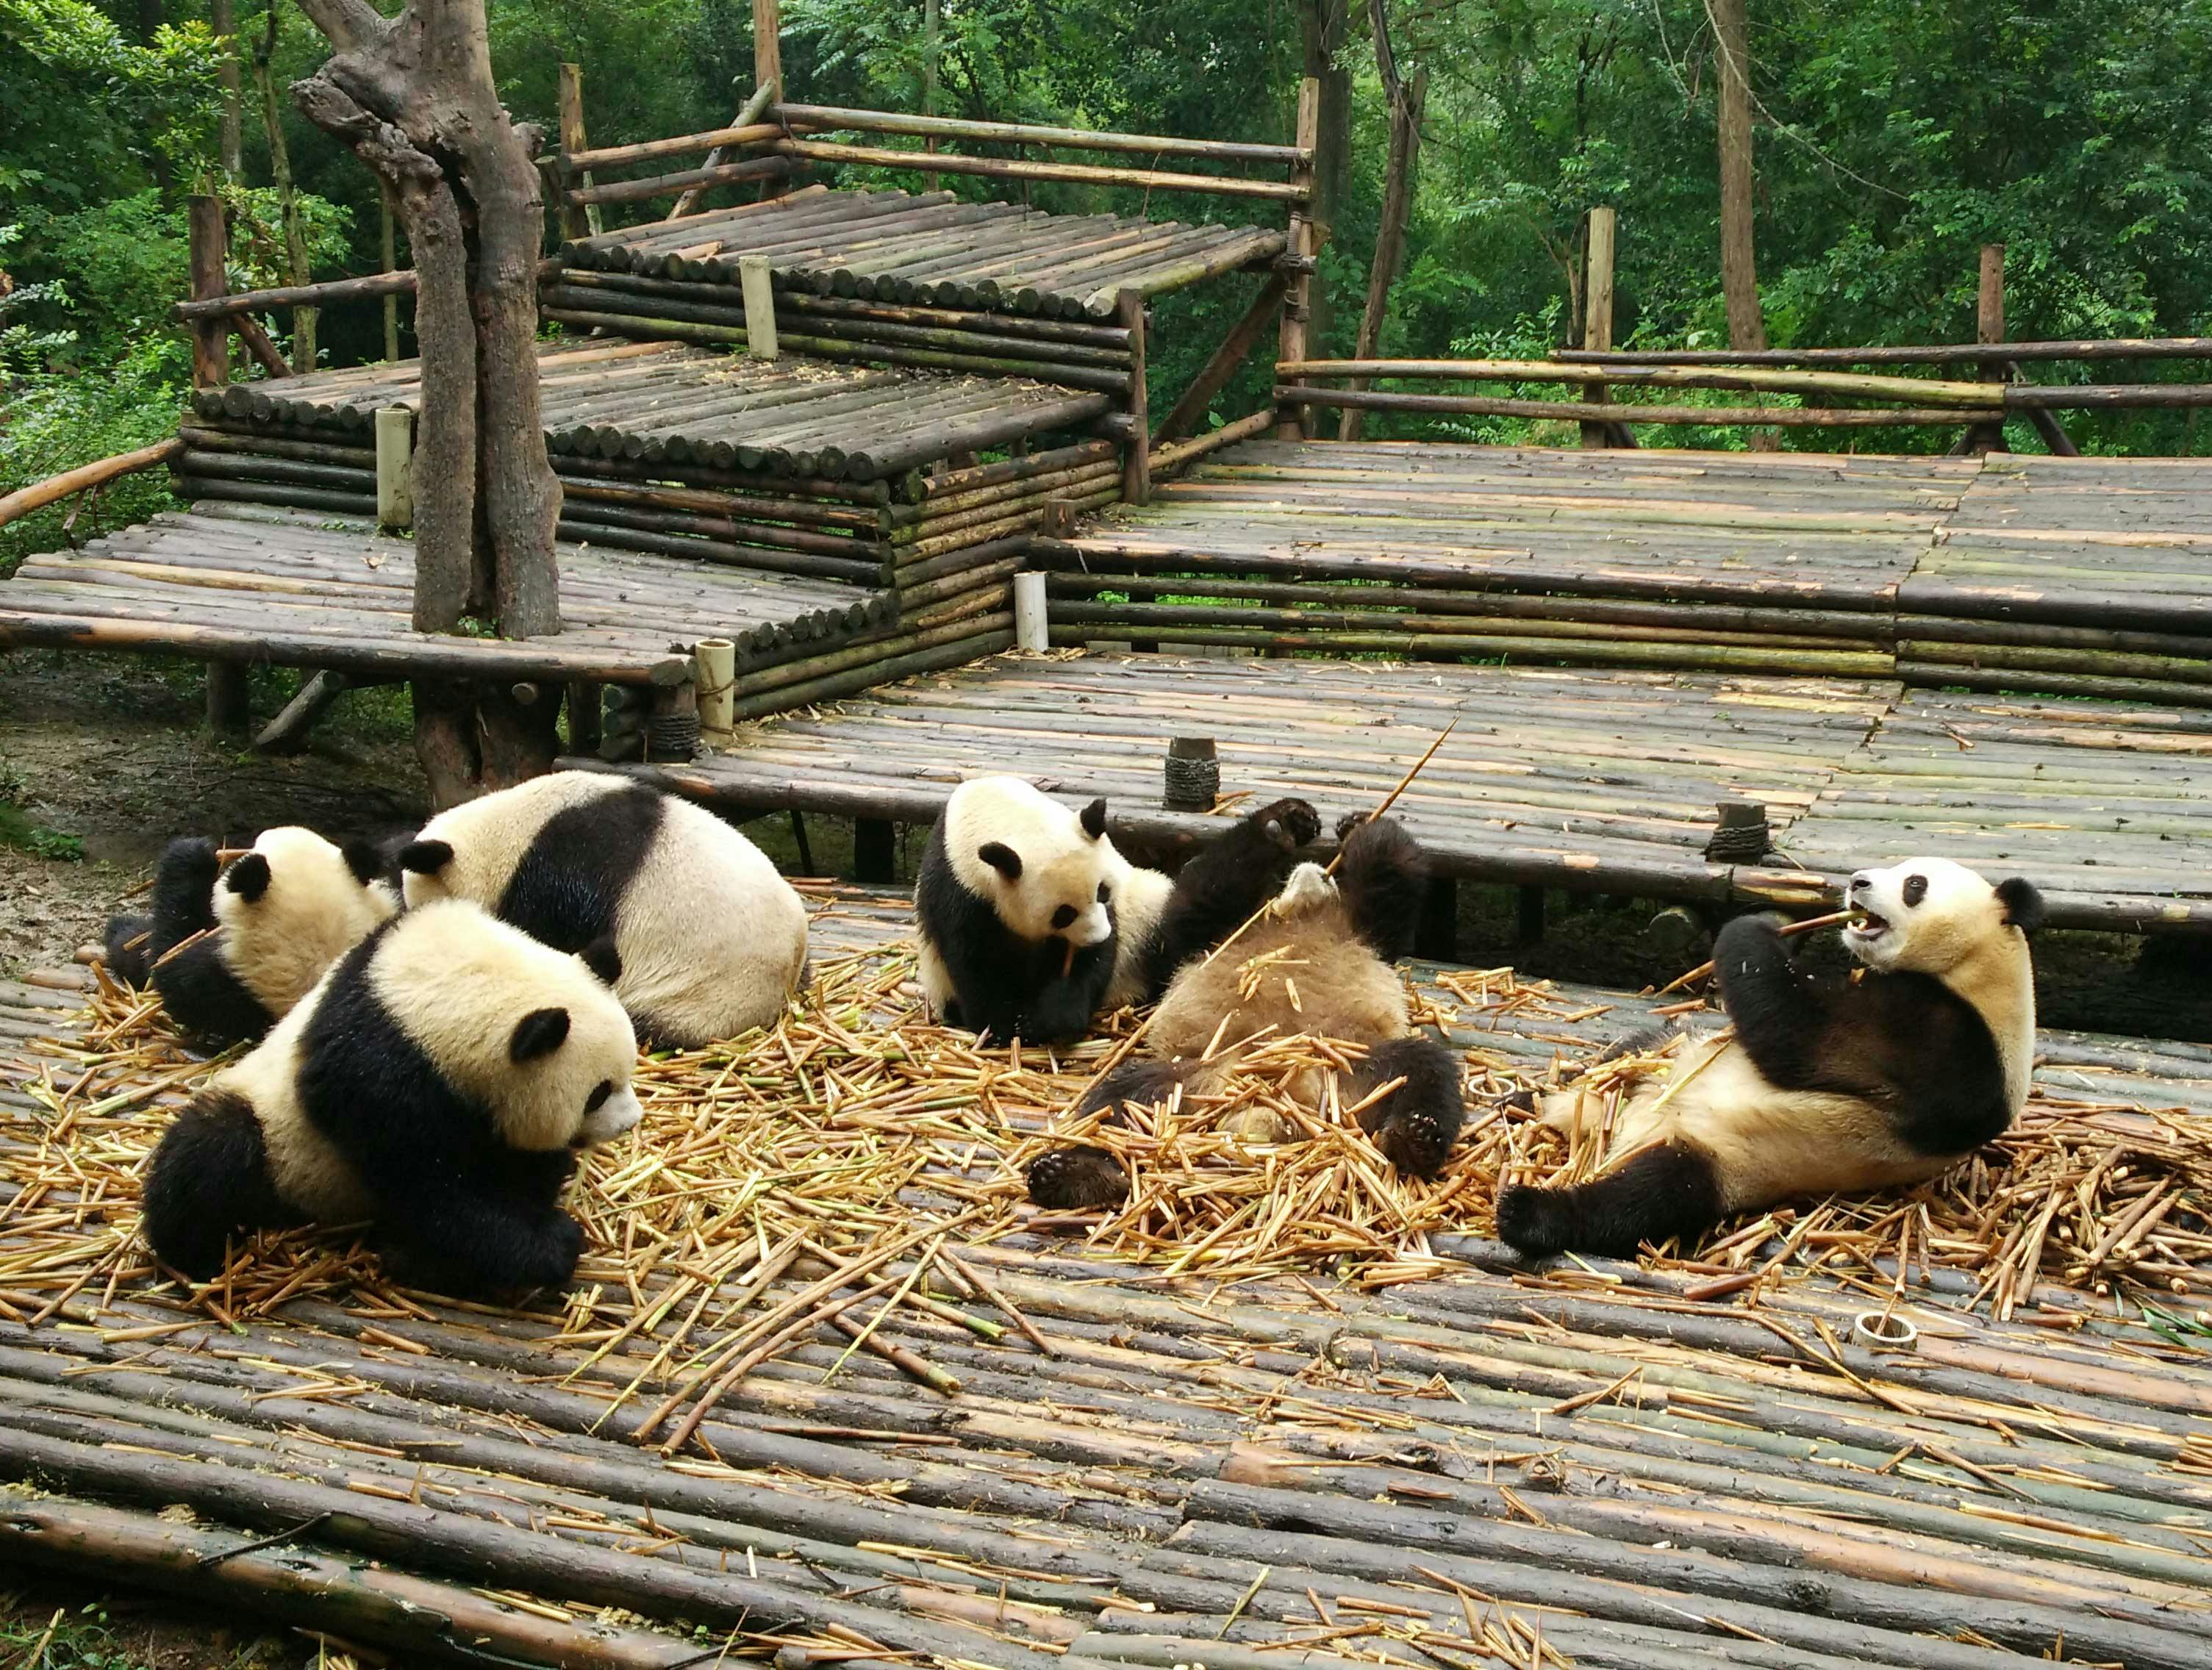 All inclusive Panda trip and customizable sites Musement